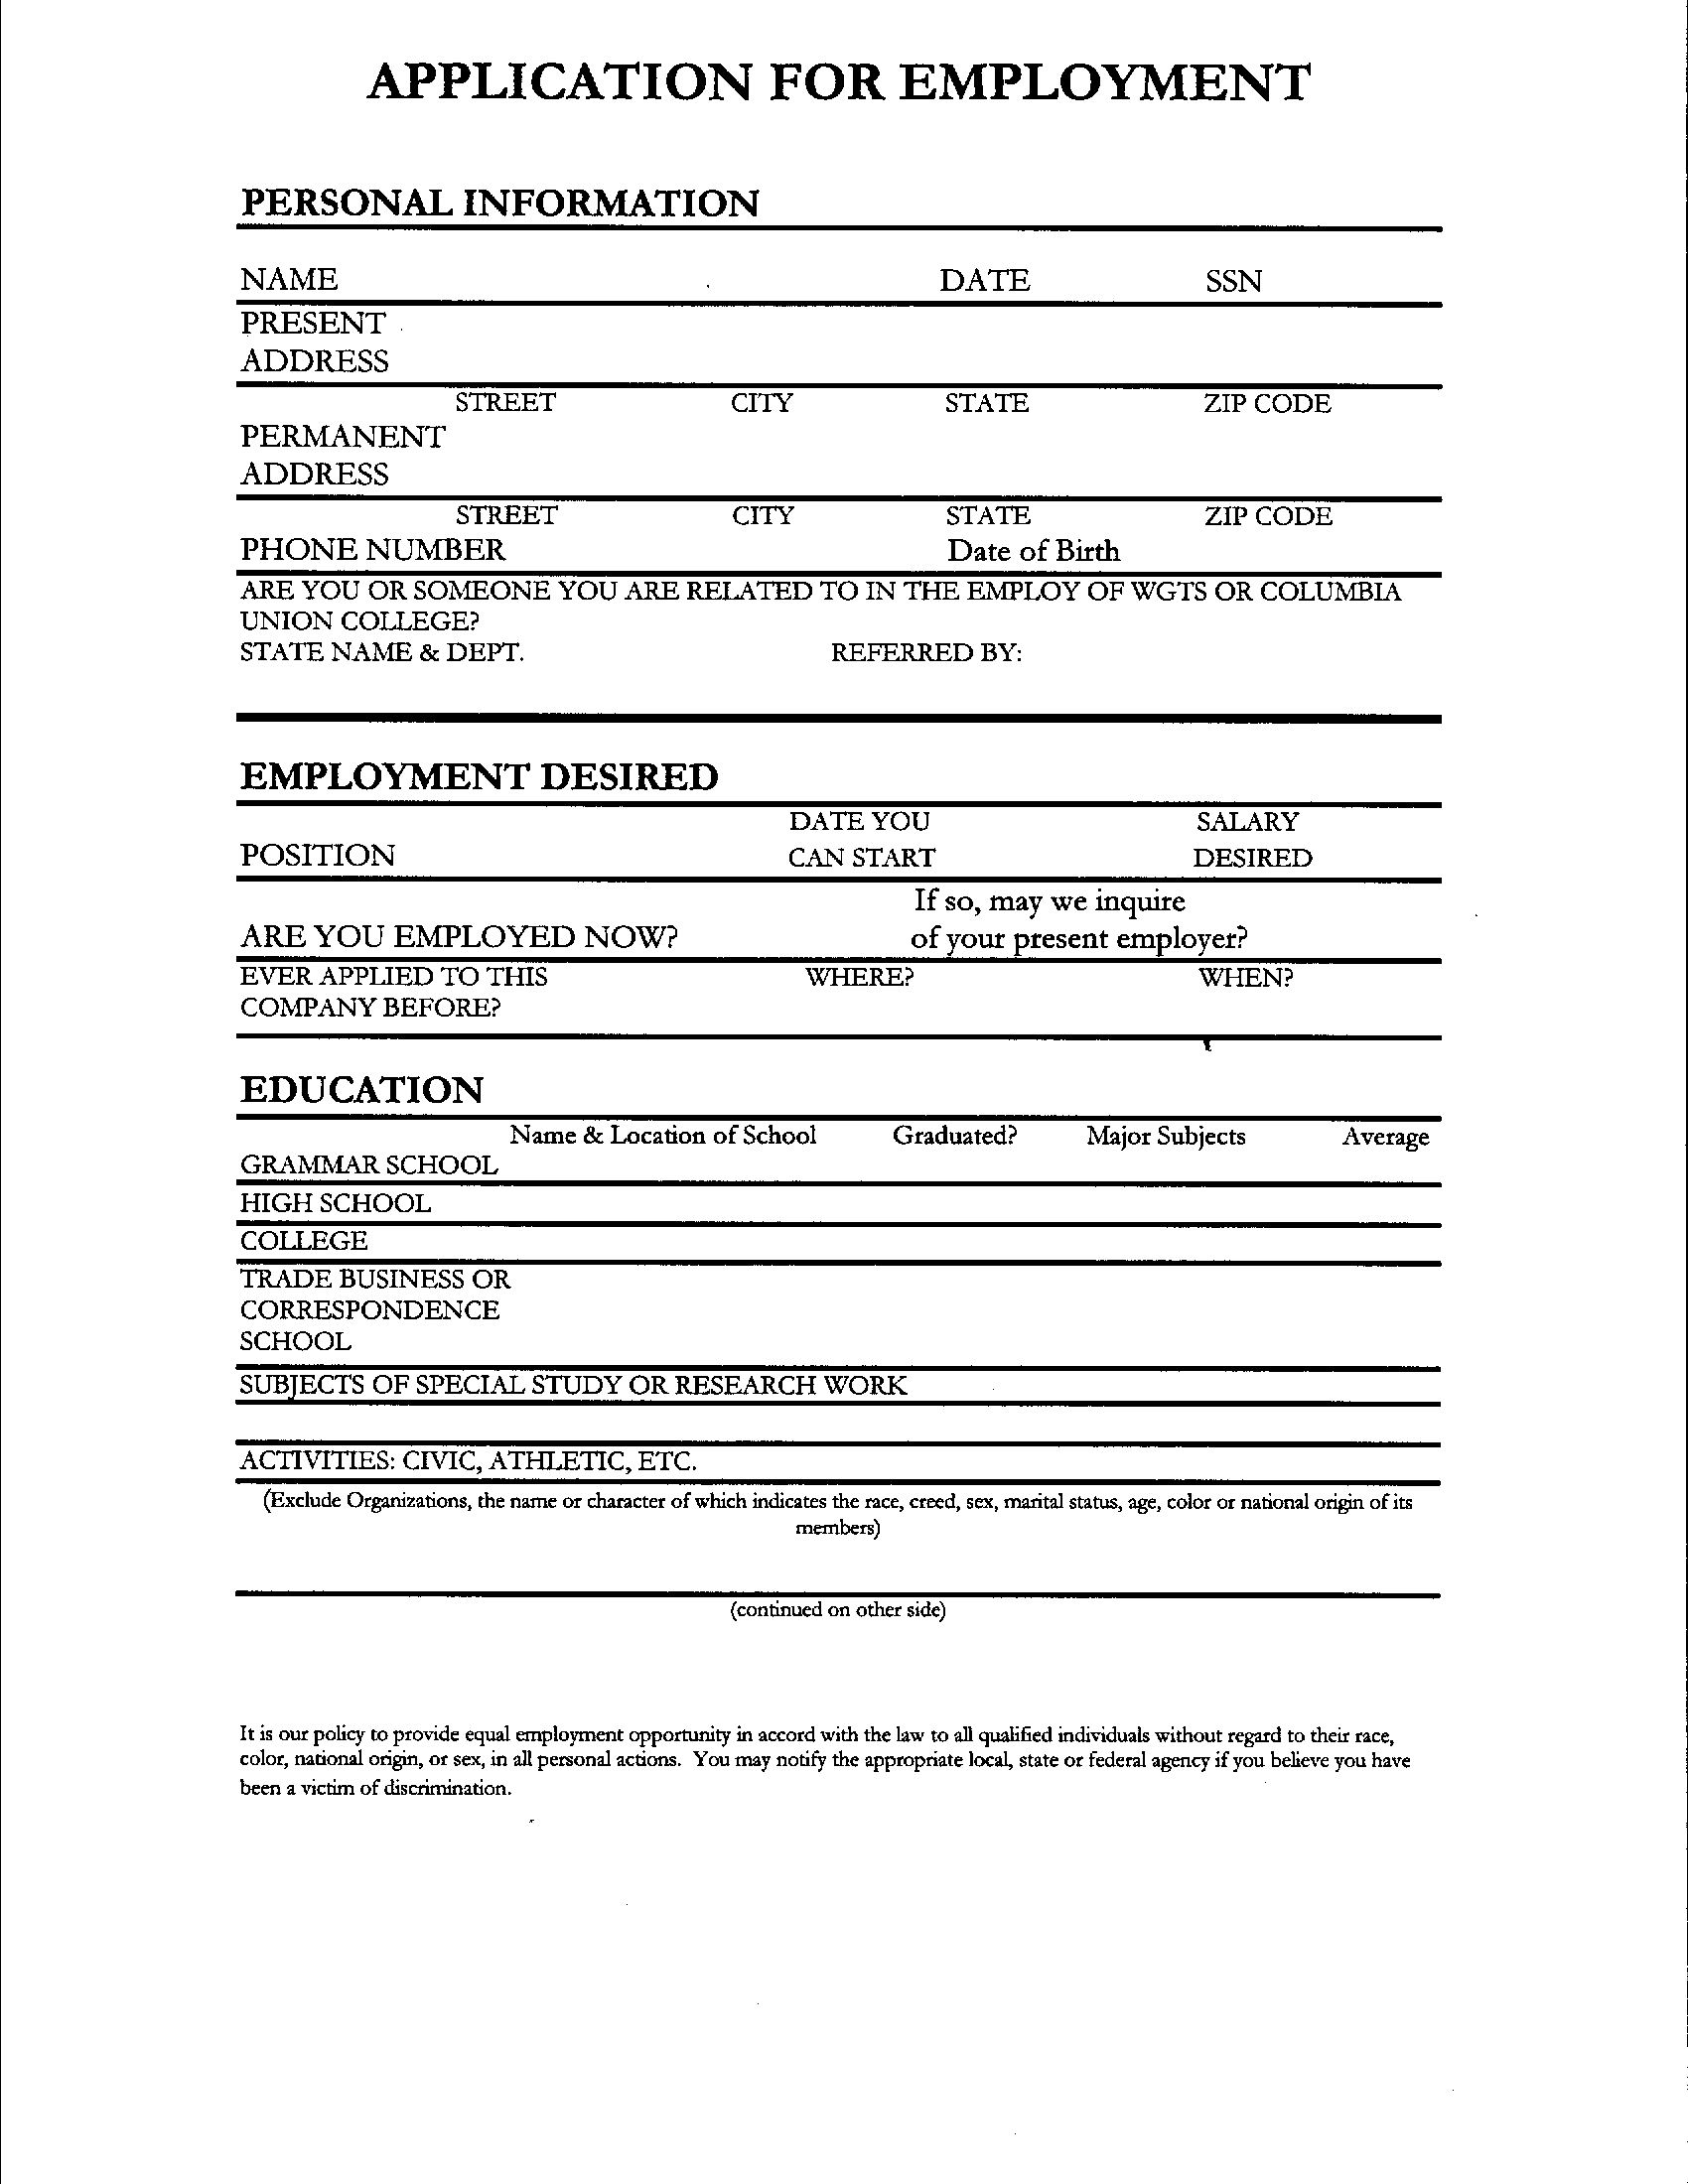 How To Fill Out A Resume Filling Out Resume How To Fill Out A Resume New How To Do A Resume how to fill out a resume|wikiresume.com